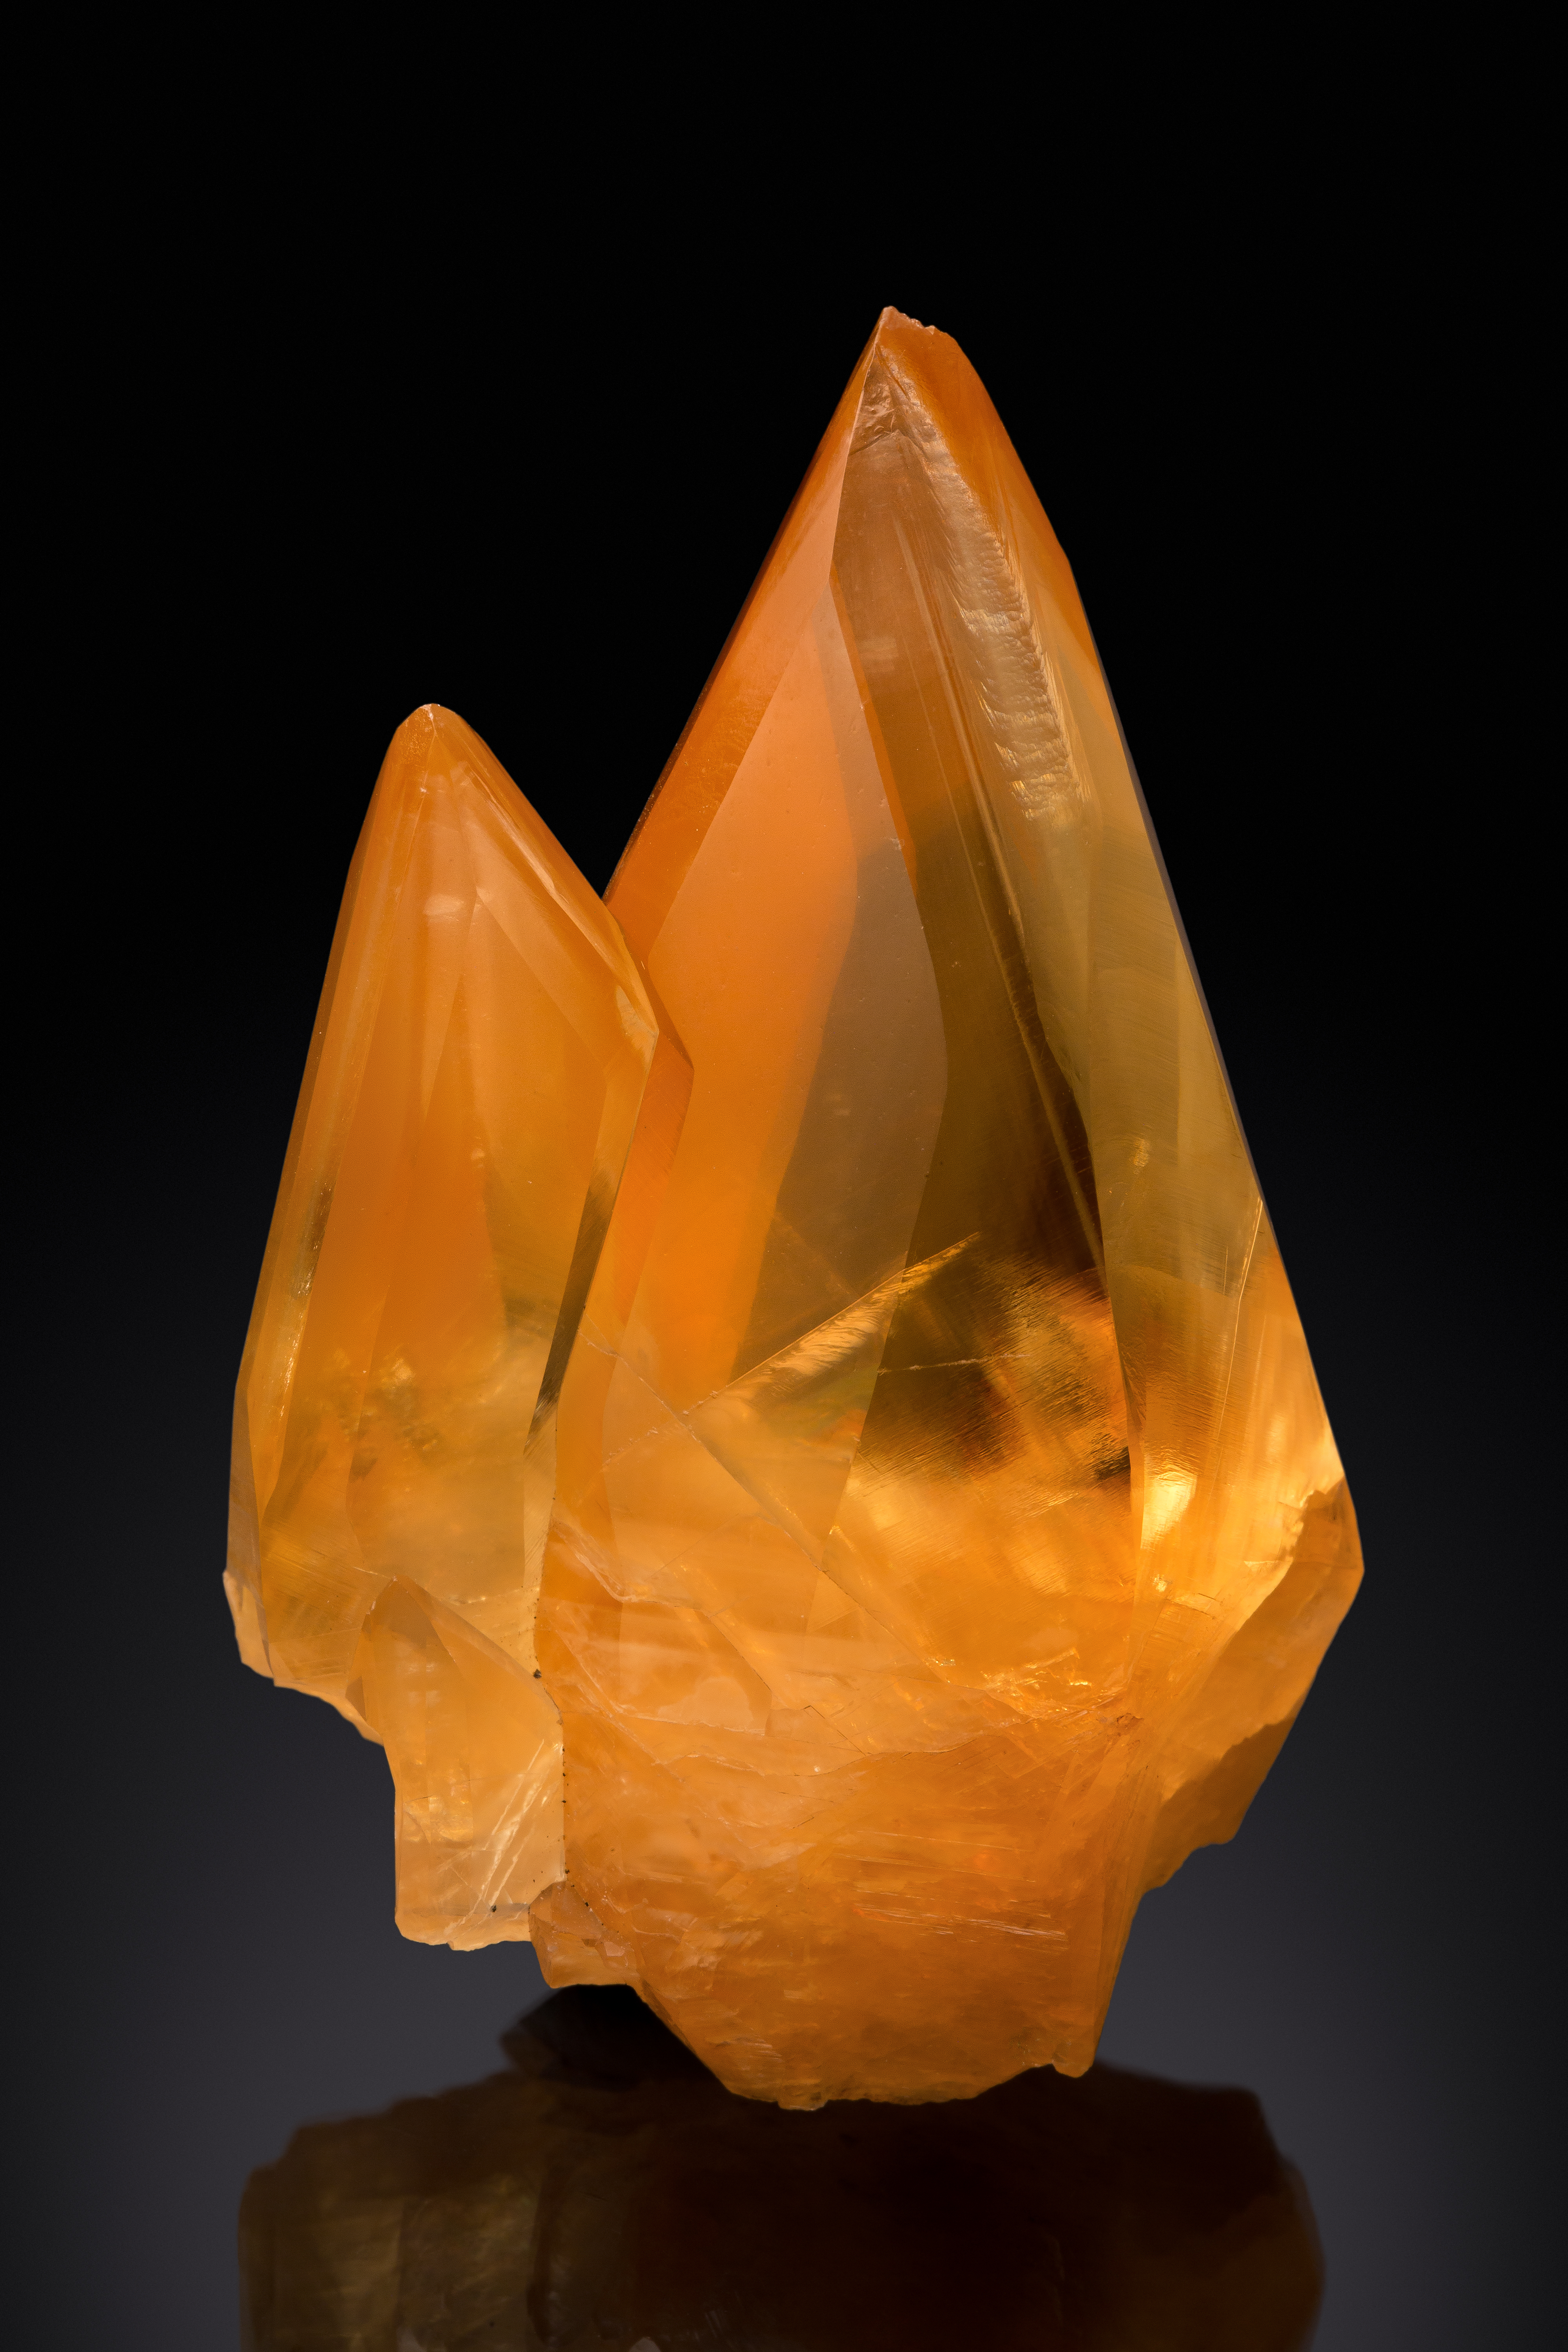 A cheerful, bright orange calcite crystal with two points extending upward to the top of the frame. Wider at the bottom with two points at the top, it is reminiscent of a flame against a black background. 